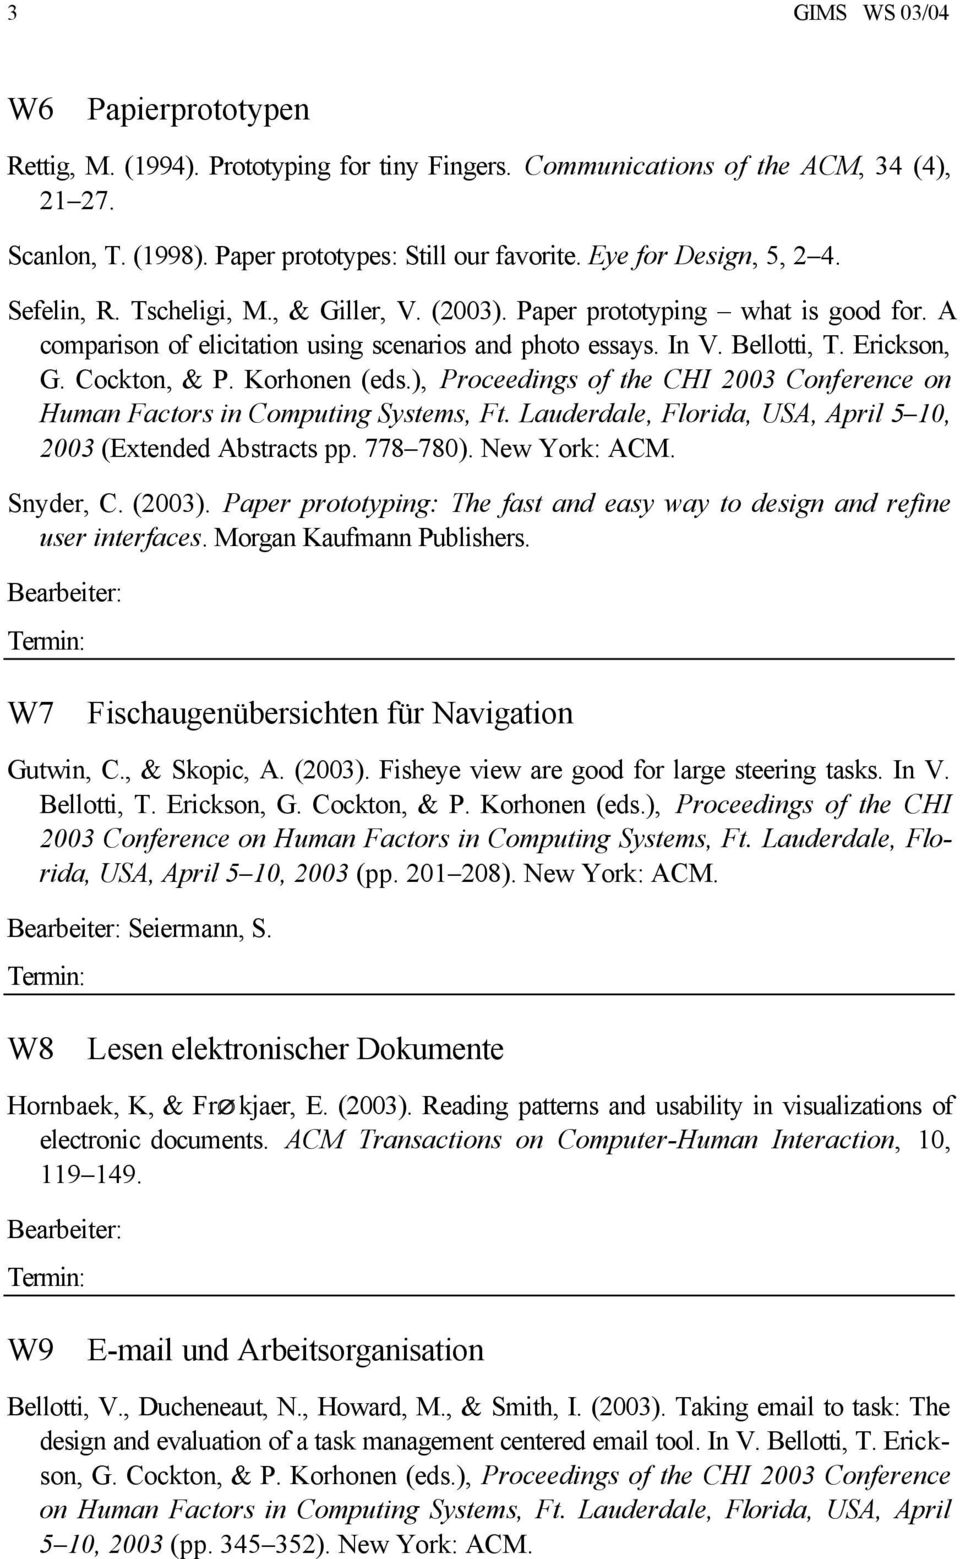 Erickson, G. Cockton, & P. Korhonen (eds.), Proceedings of the CHI 2003 Conference on Human Factors in Computing Systems, Ft. Lauderdale, Florida, USA, April 5 10, 2003 (Extended Abstracts pp.